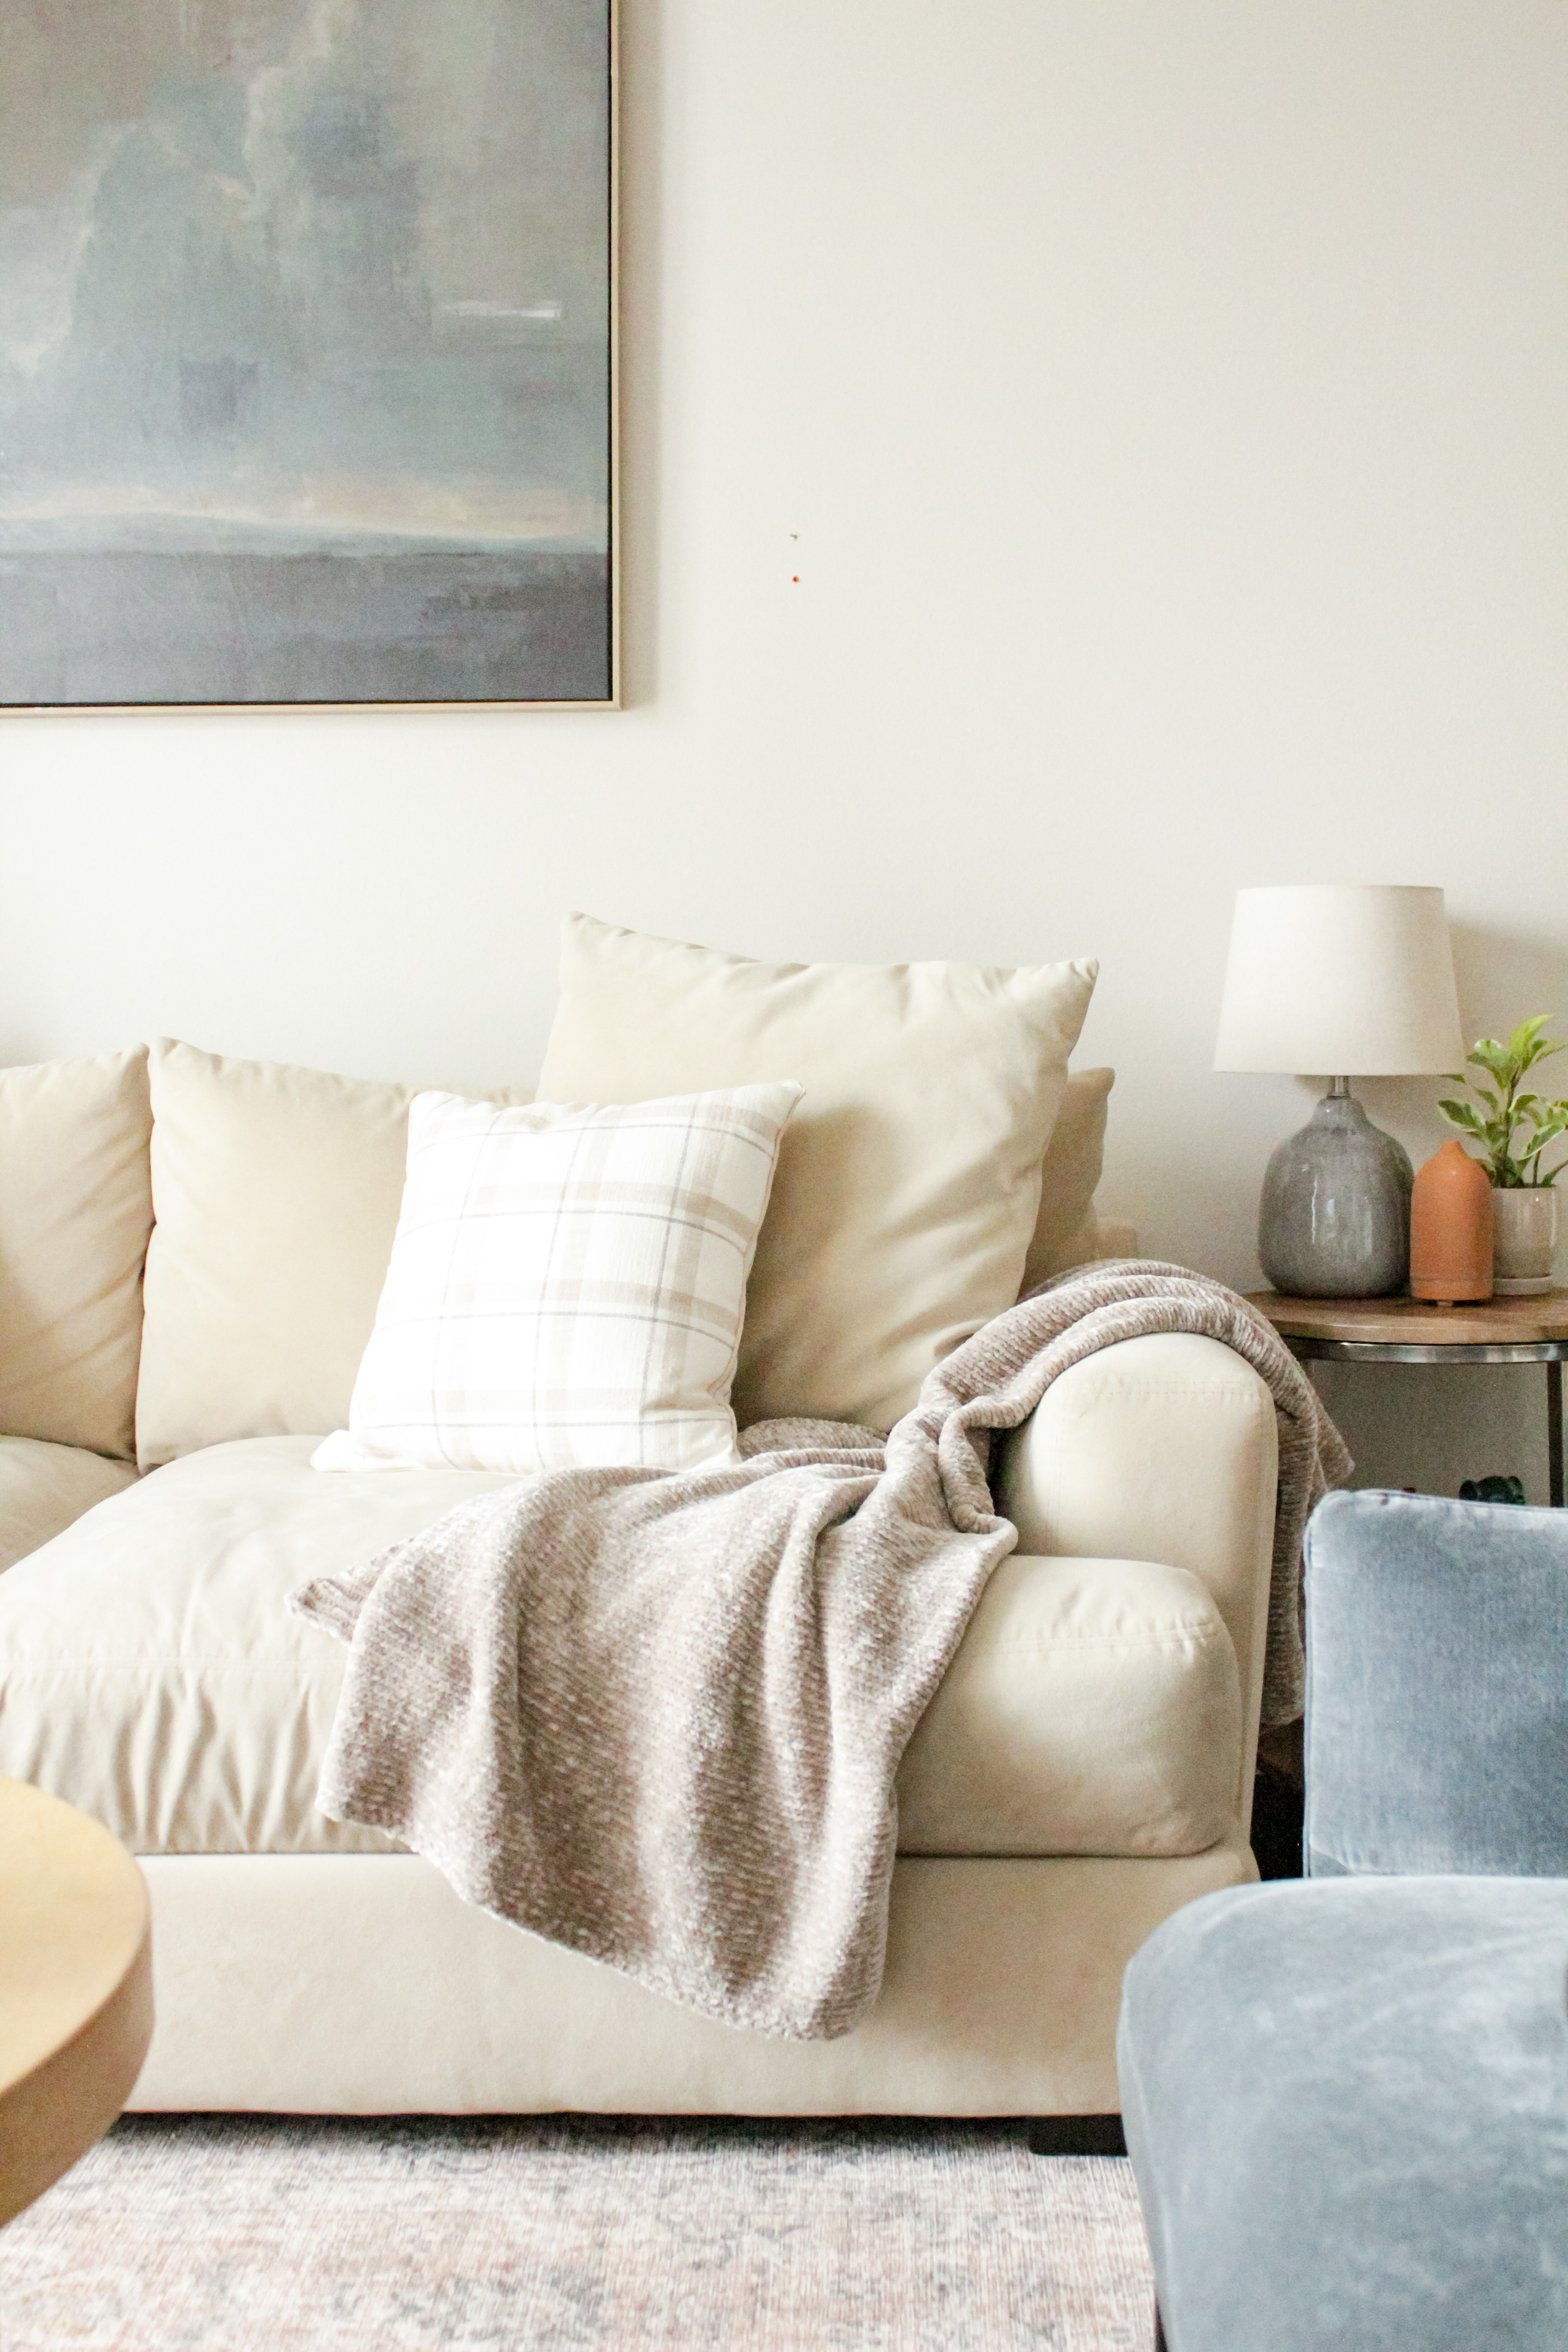 The Ultimate First Apartment Checklist: What You’ll Need for Every Room